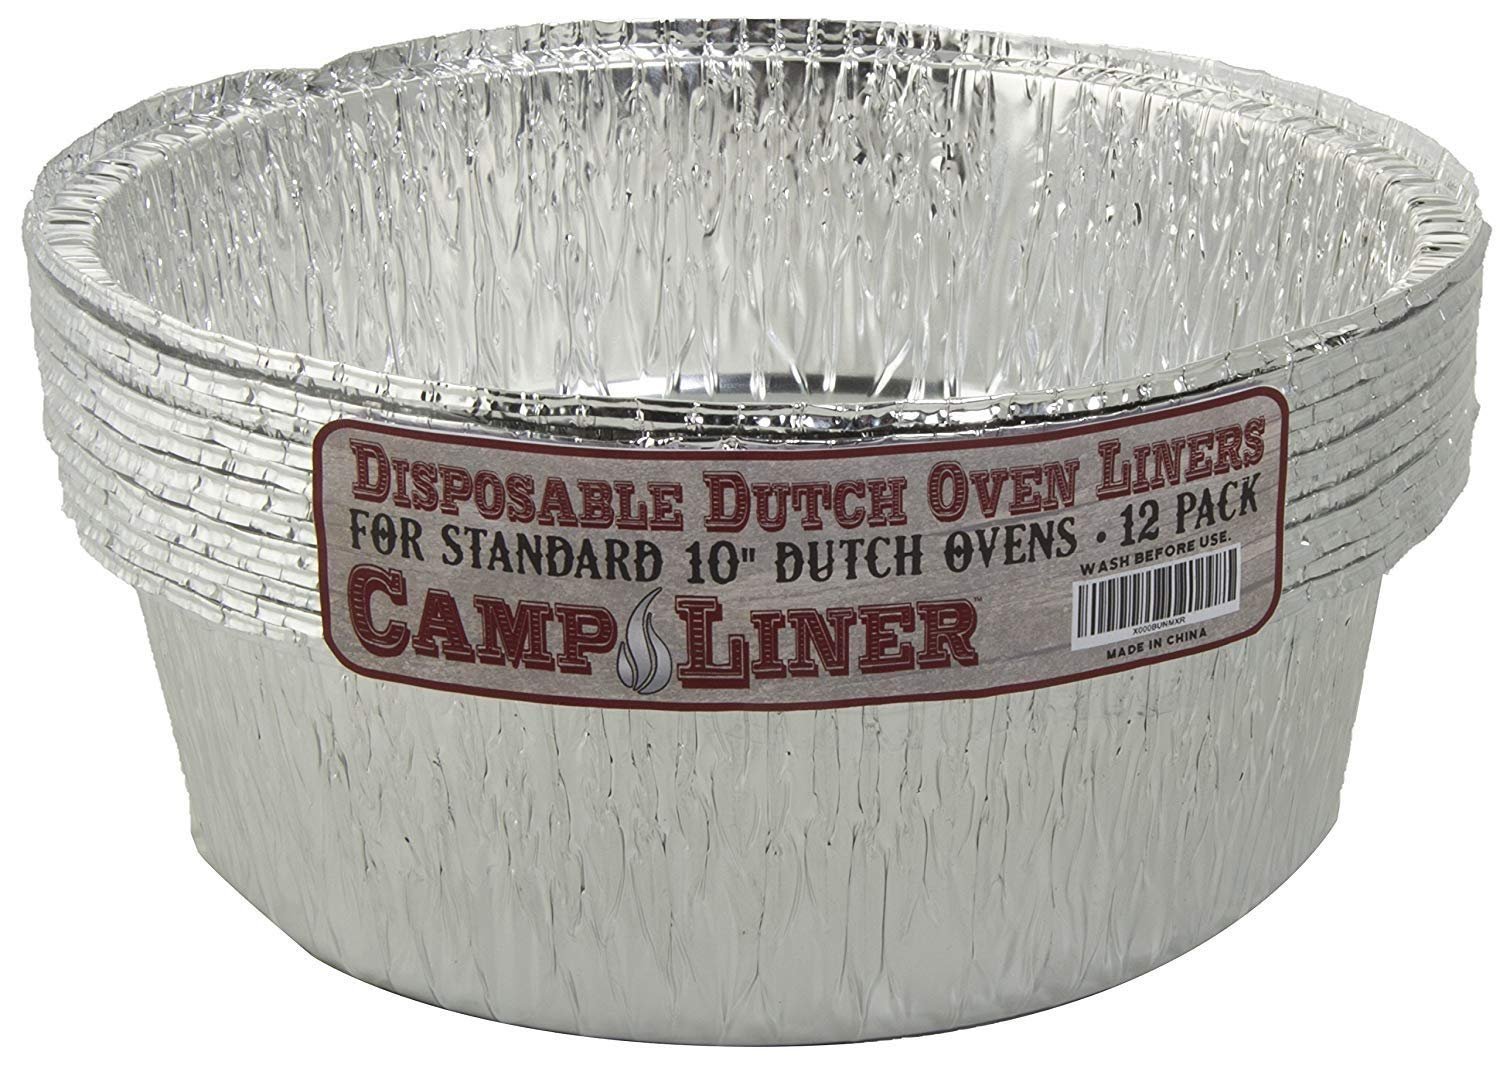 Book Cover CampLiner Dutch Oven Liners, 12 Pack of 10” 4 Quart Disposable Liners - No More Cleaning or Seasoning. Fits Lodge, Camp Chef, And Other Cast Iron Dutch Ovens